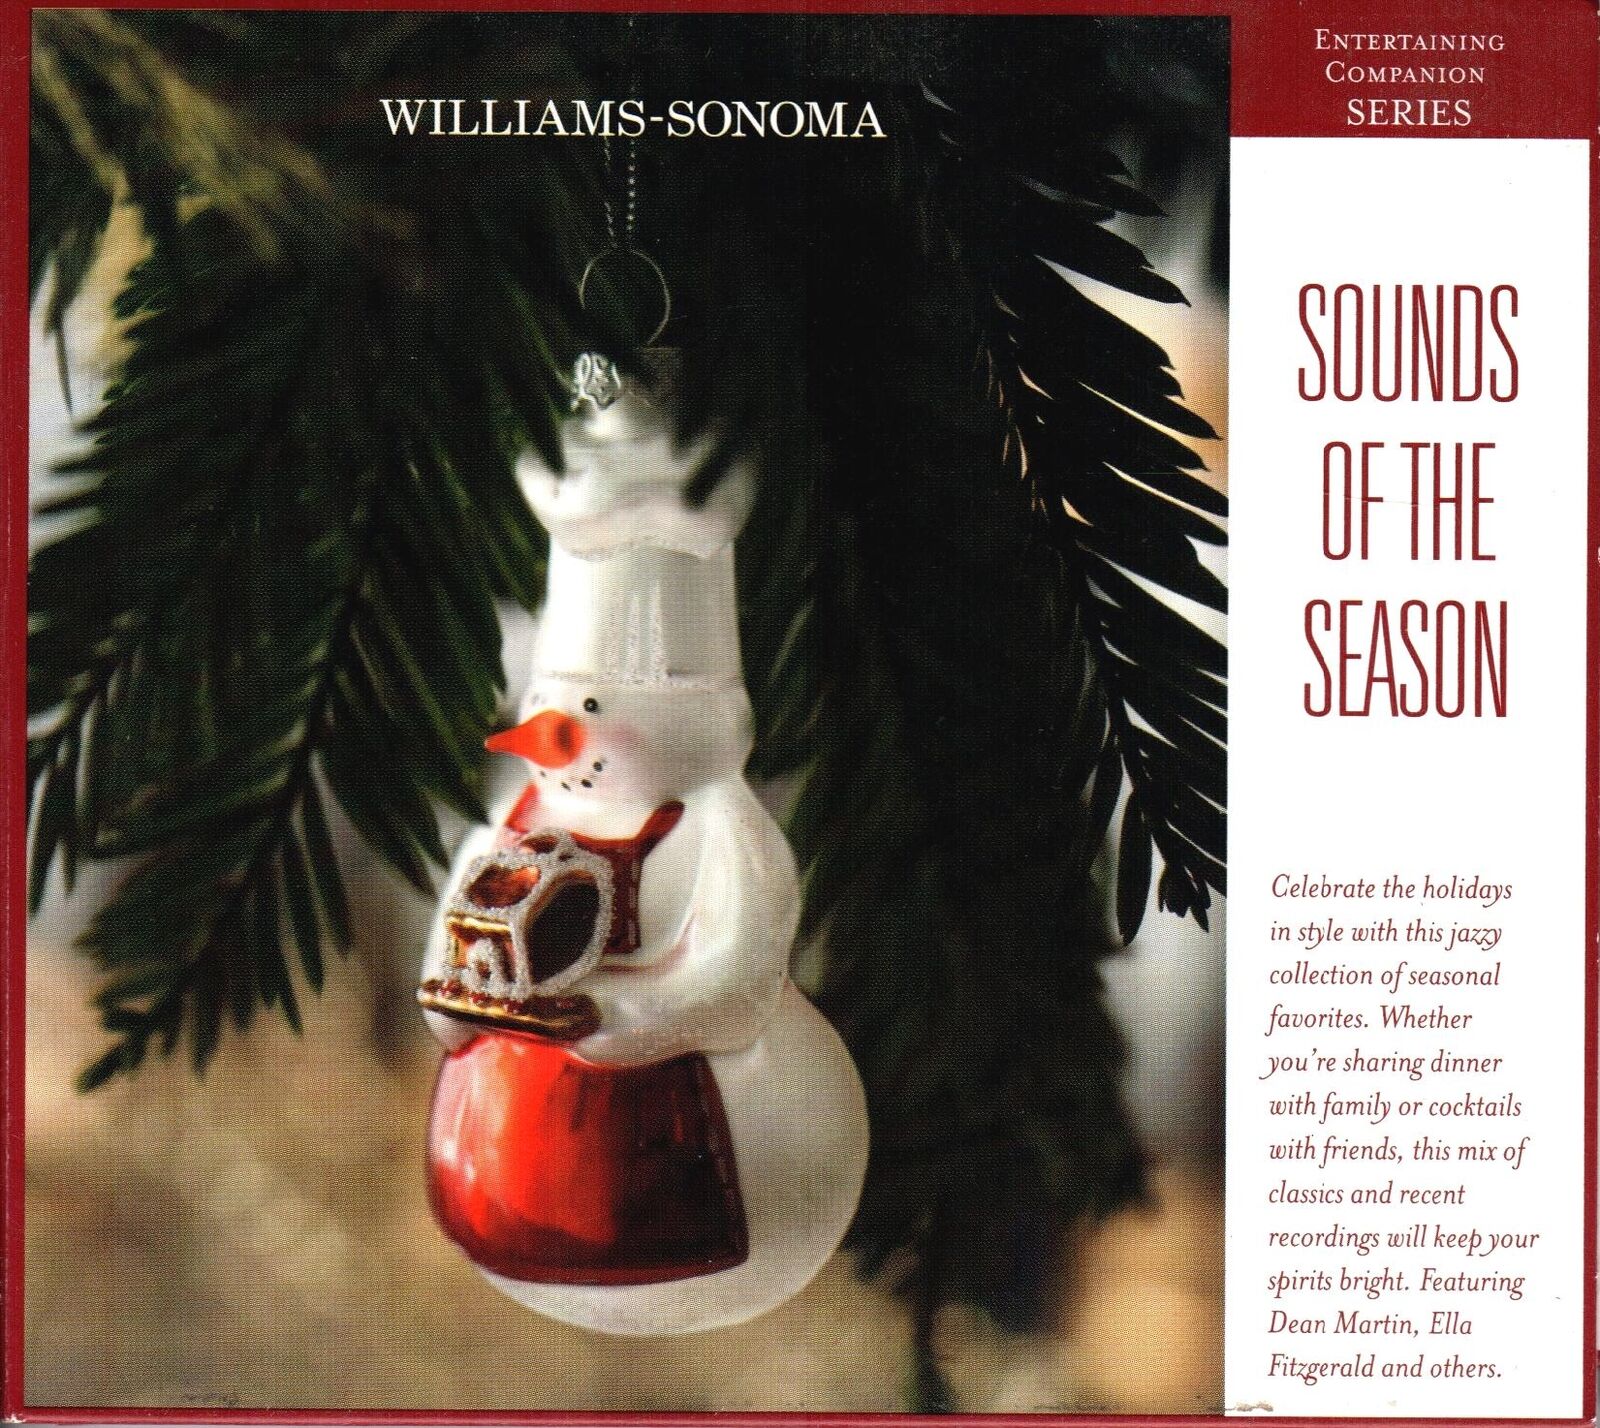 Williams-Sonoma: Sounds of the Season Holiday Music (Audio CD, 2006)